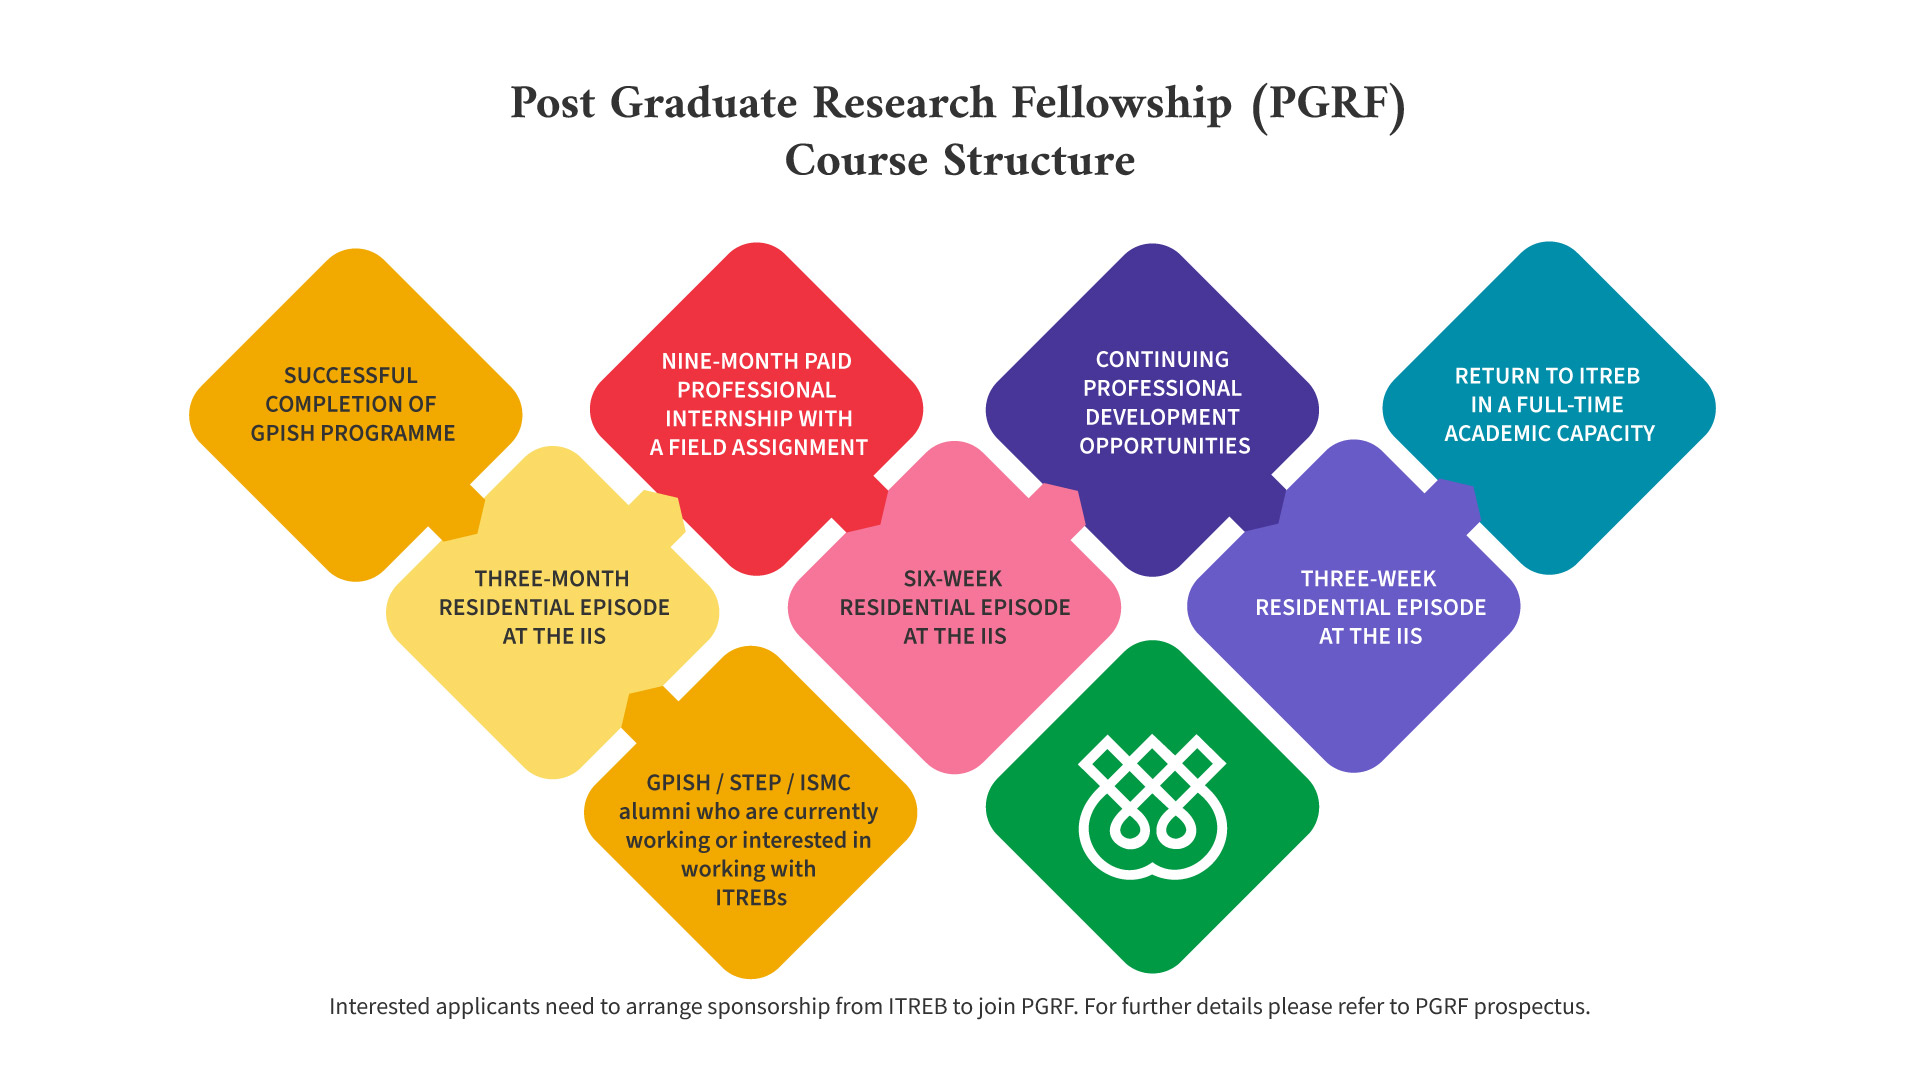 PGRF Course Structure